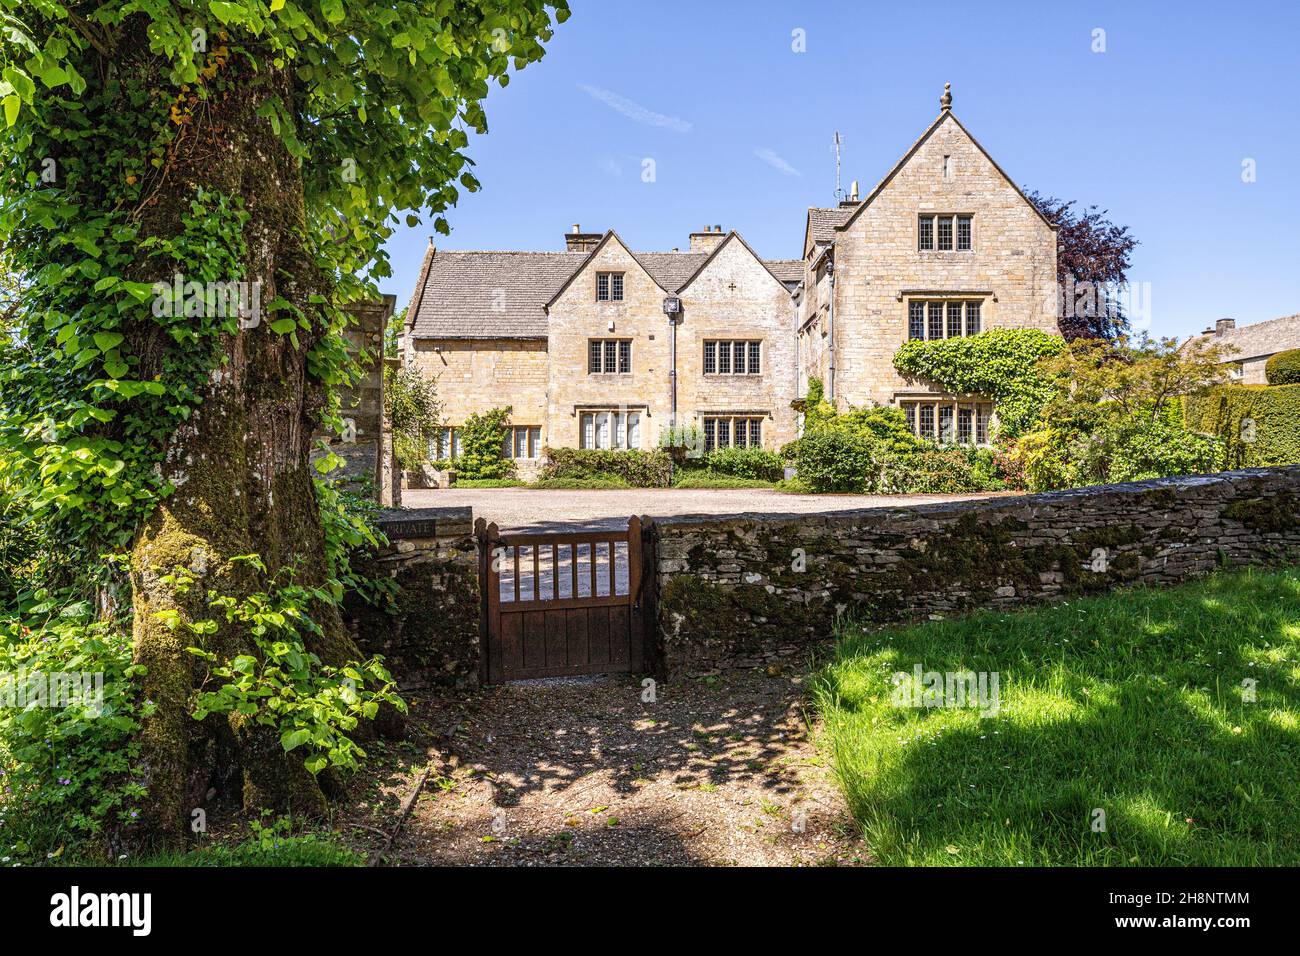 The Manor House dating back to the 15th century in the Cotswold village of Notgrove, Gloucestershire UK Stock Photo